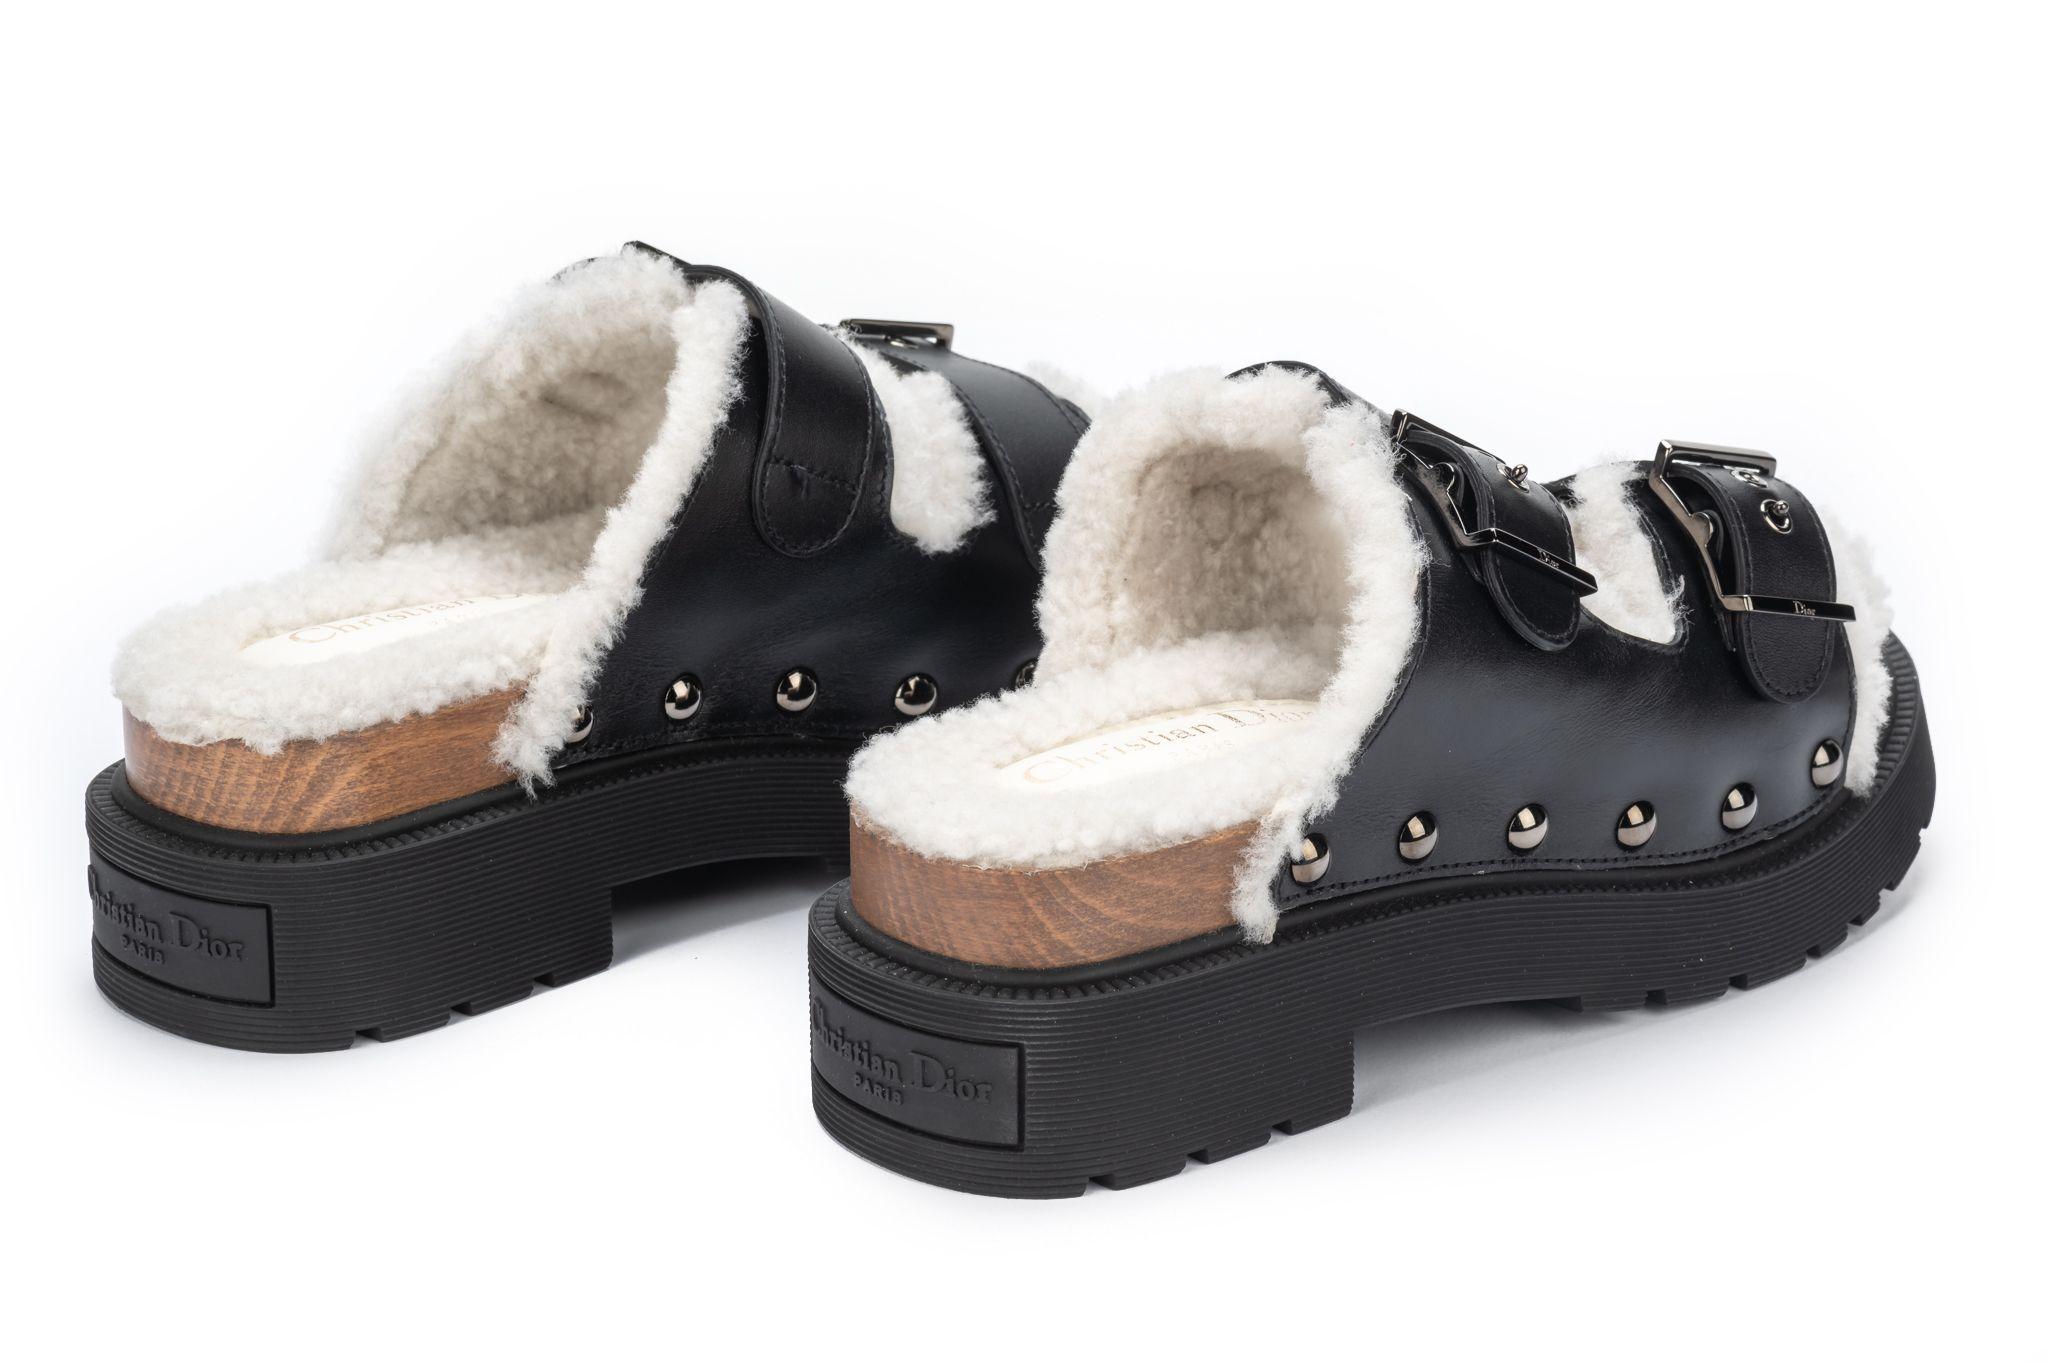 Christian Dior Faux Fur Sandals with a wooden block sole. The top is made of black leather. They're new and come with the original box. US Size 6.5.